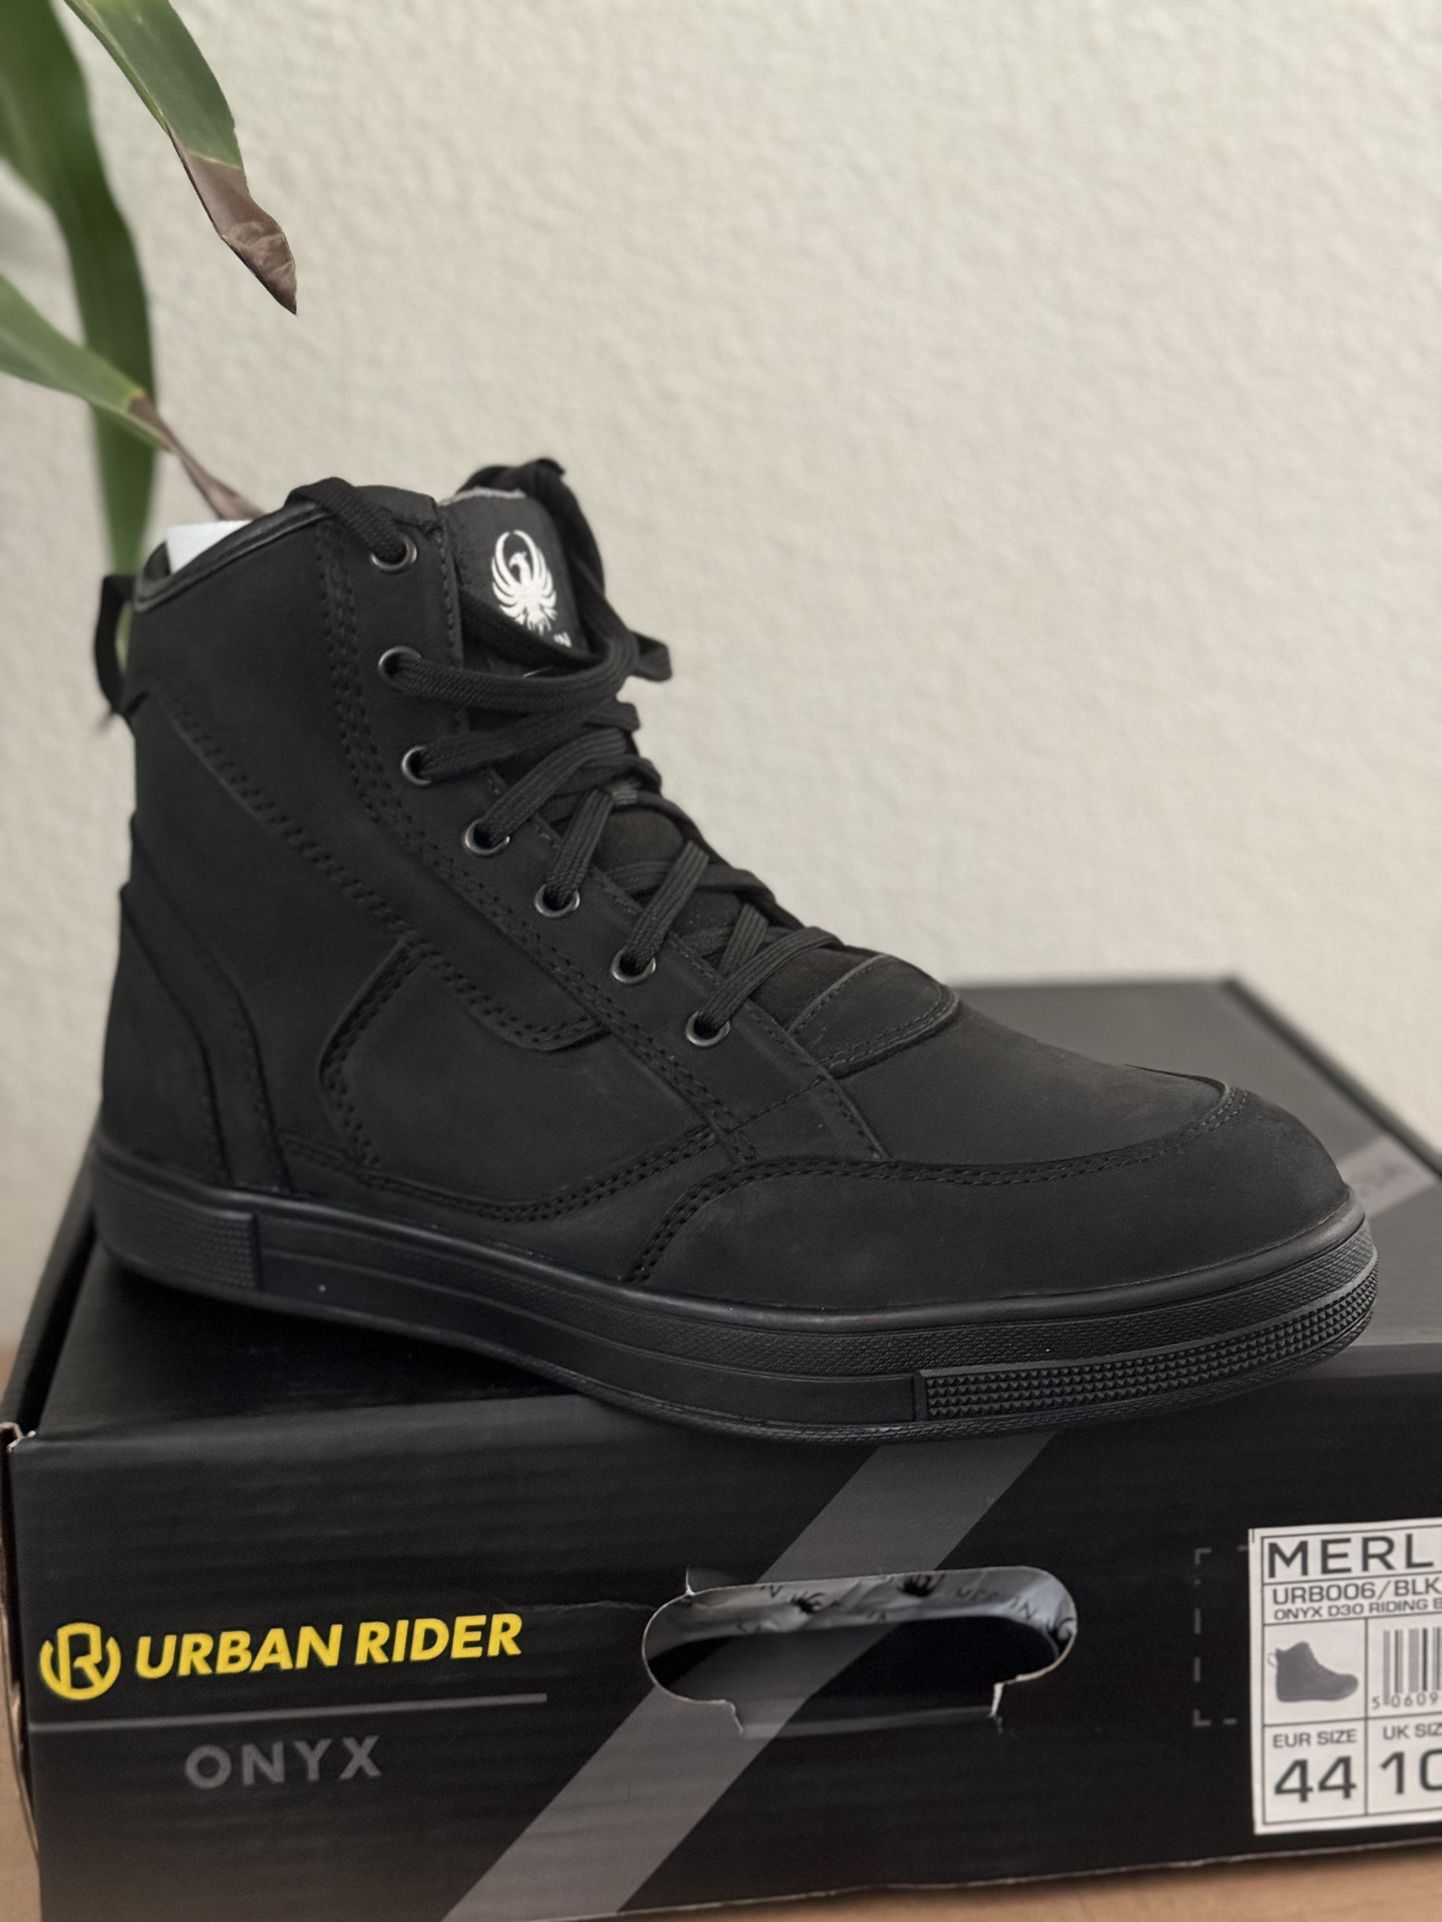 Motorcycle Boots - Merlin x Urban Rider Onyx Size 11